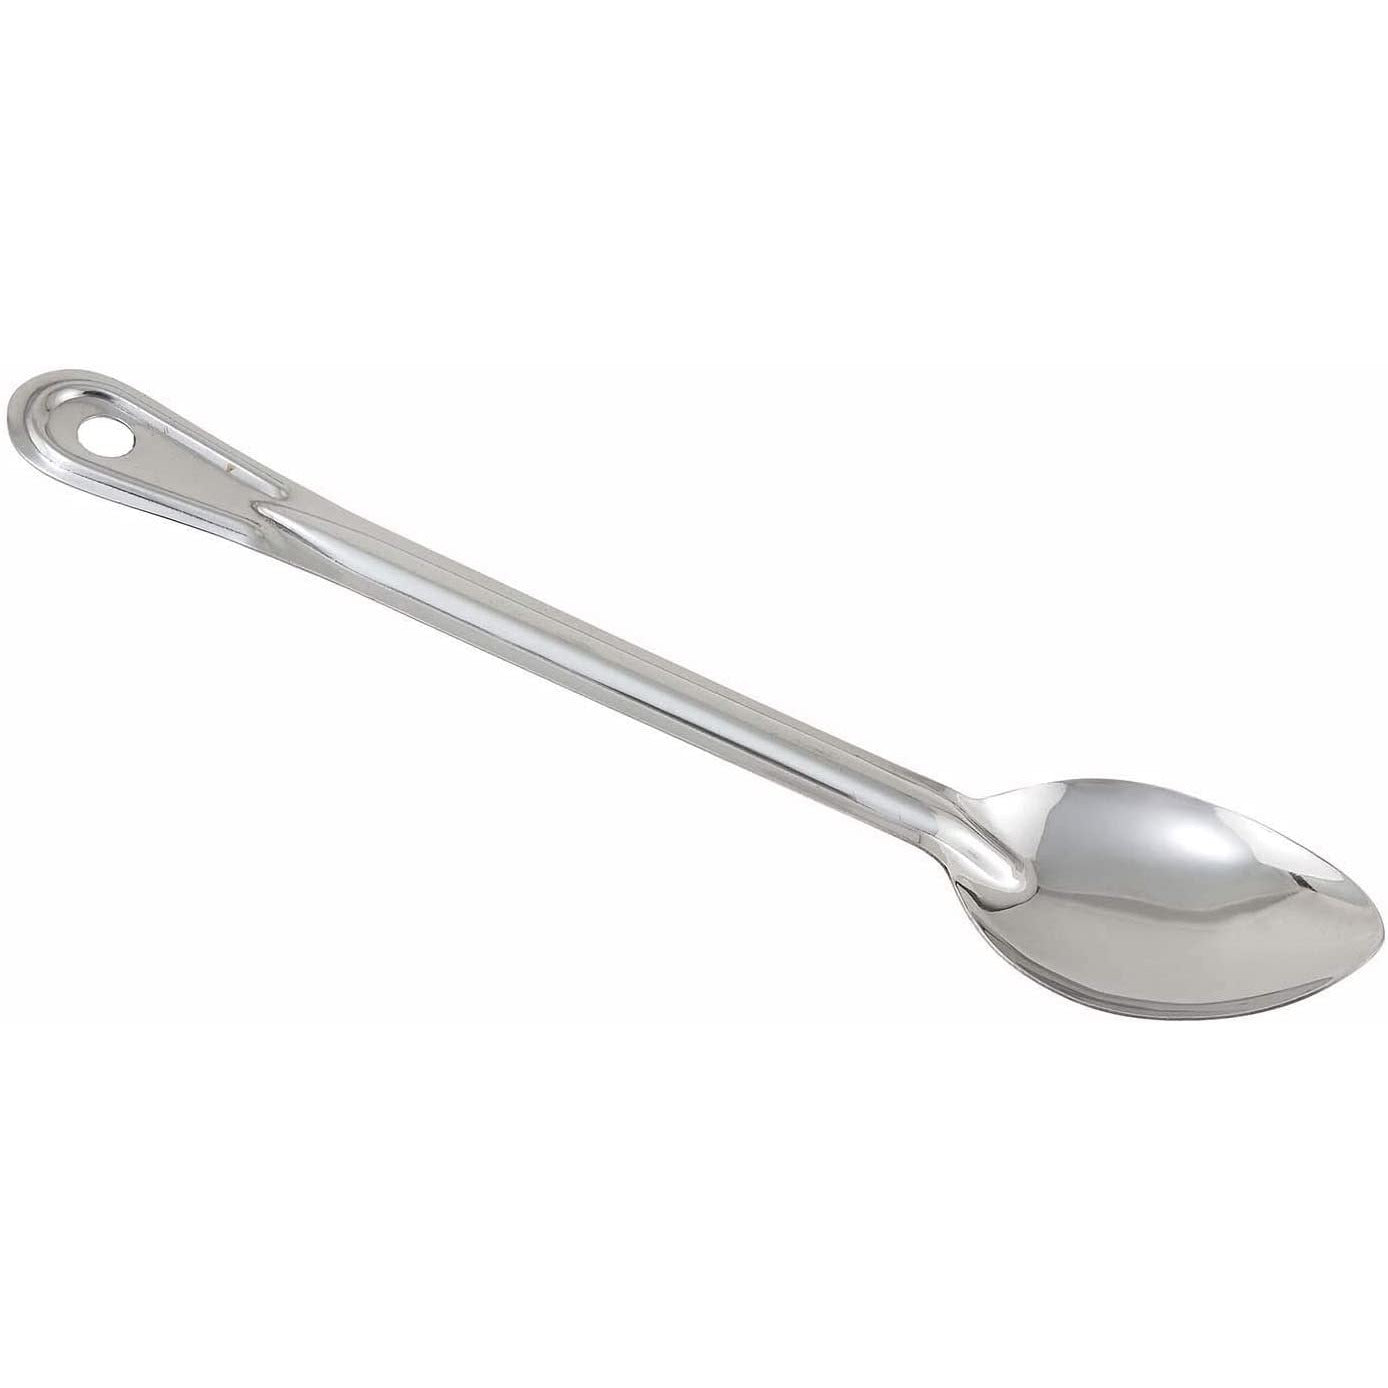 Winco BSOT-13 Solid Stainless Steel Basting Spoon, 13-Inch,Medium